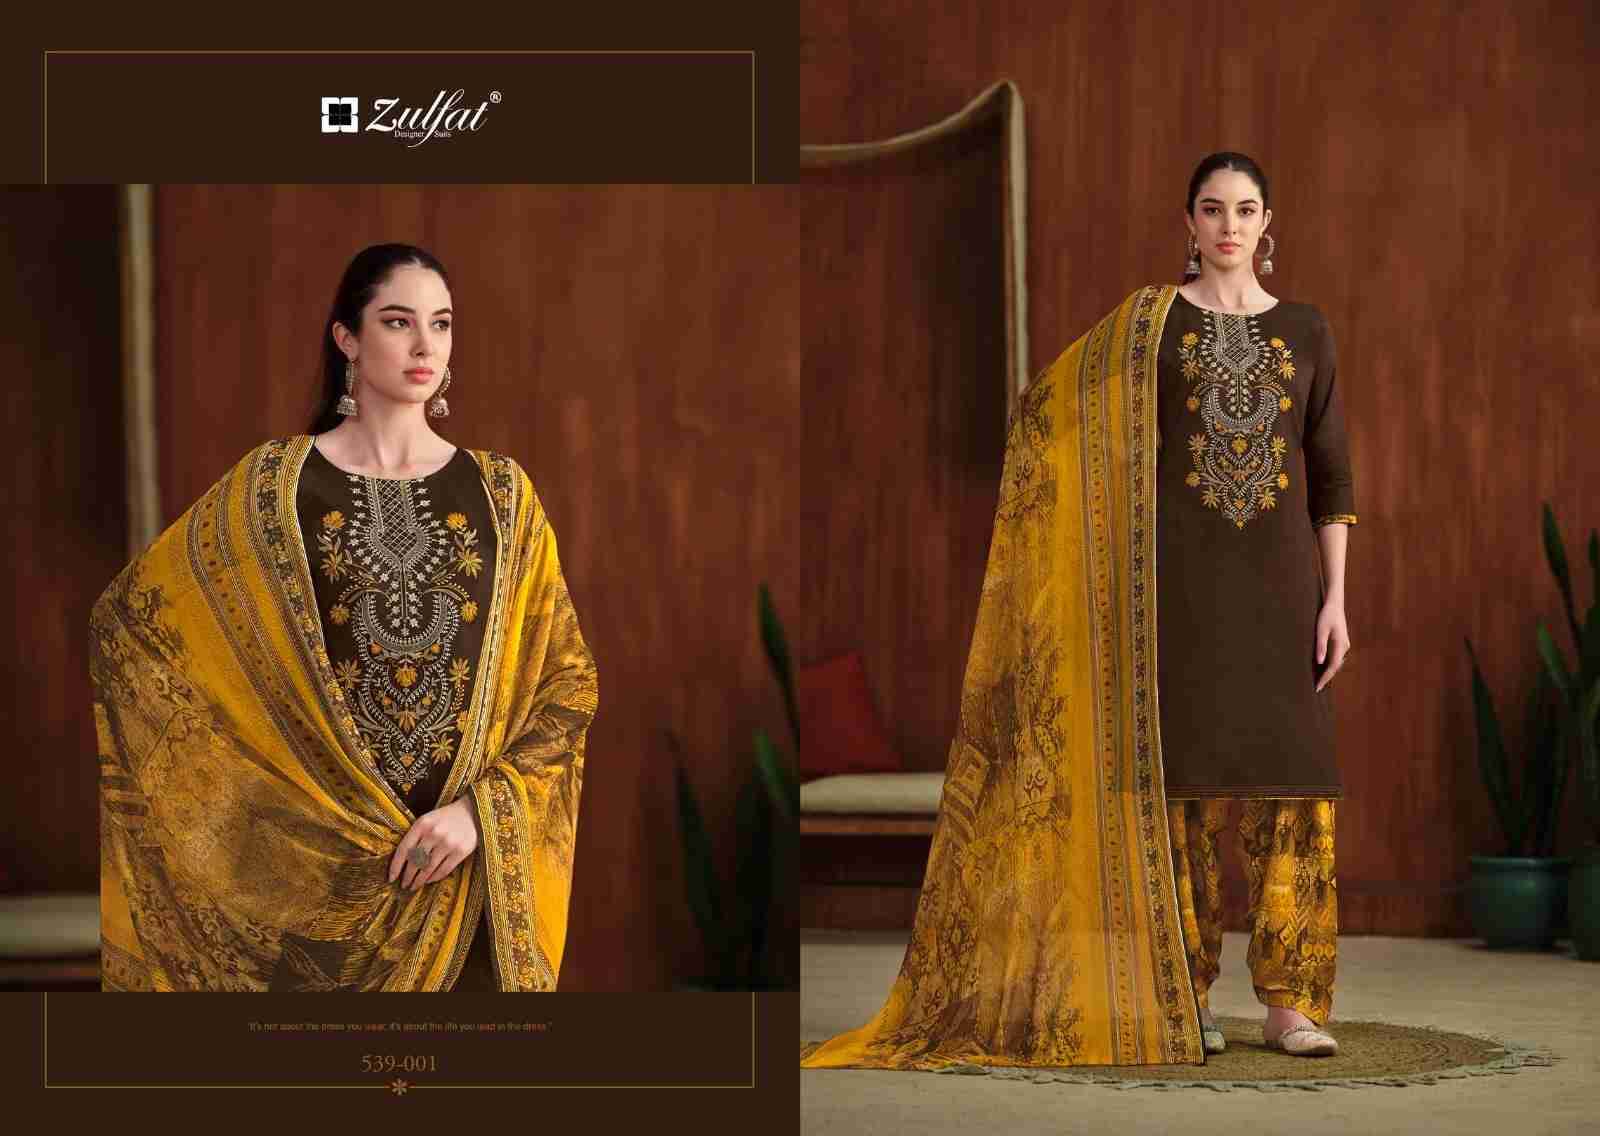 Shanaya By Zulfat 539-001 To 539-008 Series Beautiful Festive Suits Stylish Fancy Colorful Casual Wear & Ethnic Wear Pure Cotton Embroidered Dresses At Wholesale Price